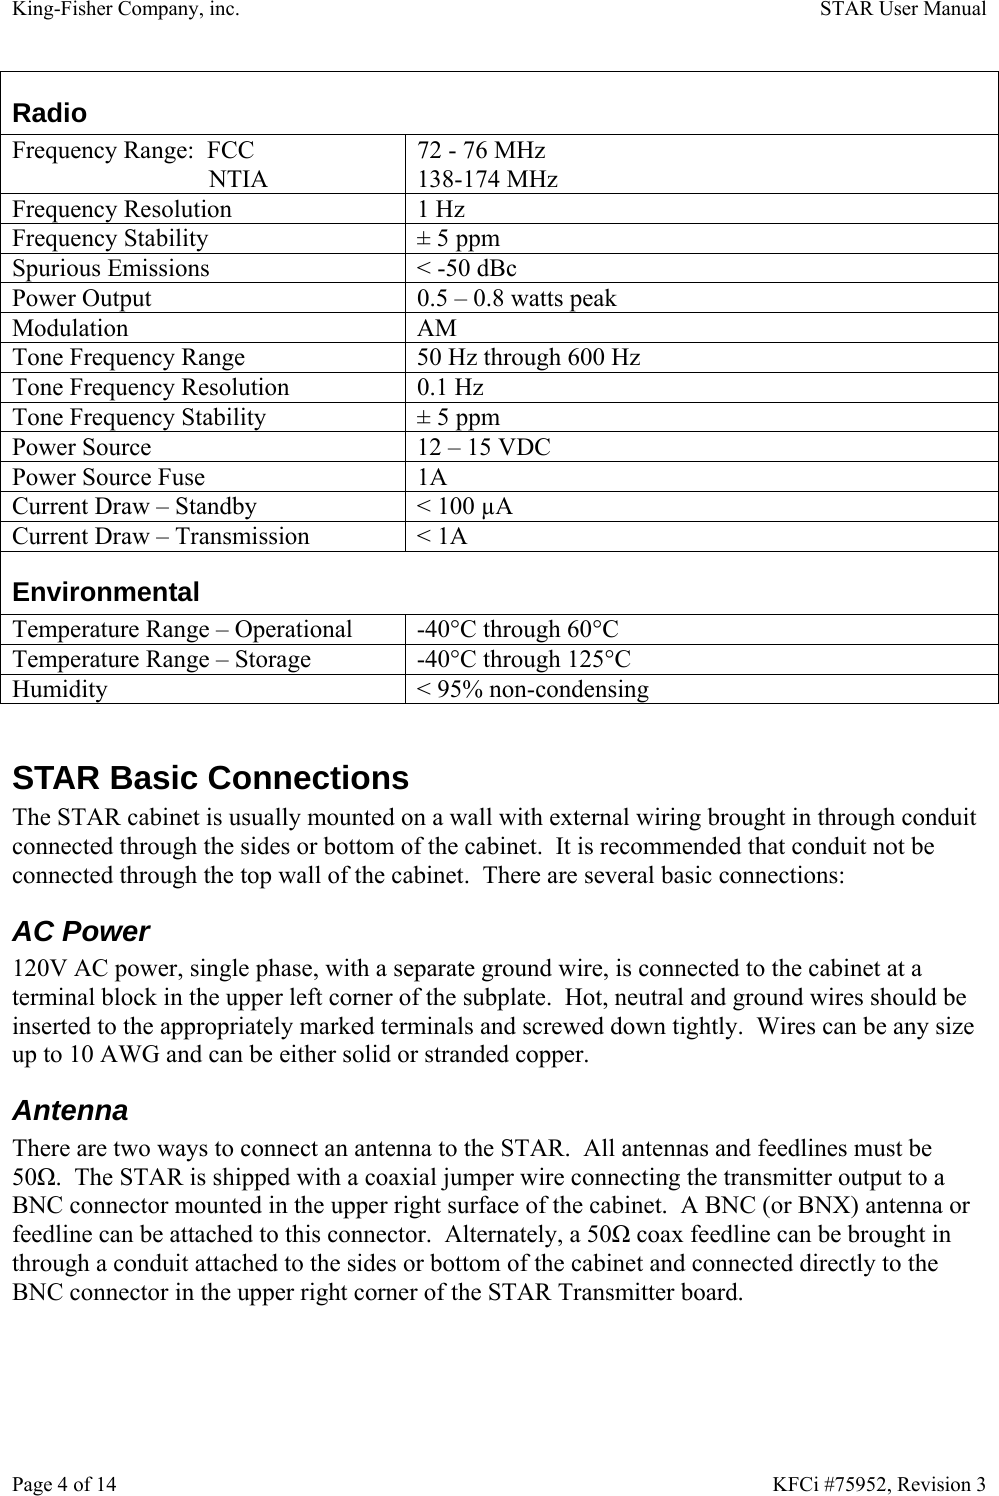 King-Fisher Company, inc.    STAR User Manual Page 4 of 14    KFCi #75952, Revision 3 Radio Frequency Range:  FCC  NTIA 72 - 76 MHz 138-174 MHz Frequency Resolution  1 Hz Frequency Stability  ± 5 ppm Spurious Emissions  &lt; -50 dBc Power Output  0.5 – 0.8 watts peak Modulation AM Tone Frequency Range  50 Hz through 600 Hz Tone Frequency Resolution  0.1 Hz Tone Frequency Stability  ± 5 ppm Power Source  12 – 15 VDC Power Source Fuse  1A Current Draw – Standby  &lt; 100 µA Current Draw – Transmission  &lt; 1A Environmental Temperature Range – Operational  -40°C through 60°C Temperature Range – Storage  -40°C through 125°C Humidity  &lt; 95% non-condensing  STAR Basic Connections The STAR cabinet is usually mounted on a wall with external wiring brought in through conduit connected through the sides or bottom of the cabinet.  It is recommended that conduit not be connected through the top wall of the cabinet.  There are several basic connections: AC Power 120V AC power, single phase, with a separate ground wire, is connected to the cabinet at a terminal block in the upper left corner of the subplate.  Hot, neutral and ground wires should be inserted to the appropriately marked terminals and screwed down tightly.  Wires can be any size up to 10 AWG and can be either solid or stranded copper. Antenna There are two ways to connect an antenna to the STAR.  All antennas and feedlines must be 50Ω.  The STAR is shipped with a coaxial jumper wire connecting the transmitter output to a BNC connector mounted in the upper right surface of the cabinet.  A BNC (or BNX) antenna or feedline can be attached to this connector.  Alternately, a 50Ω coax feedline can be brought in through a conduit attached to the sides or bottom of the cabinet and connected directly to the BNC connector in the upper right corner of the STAR Transmitter board. 